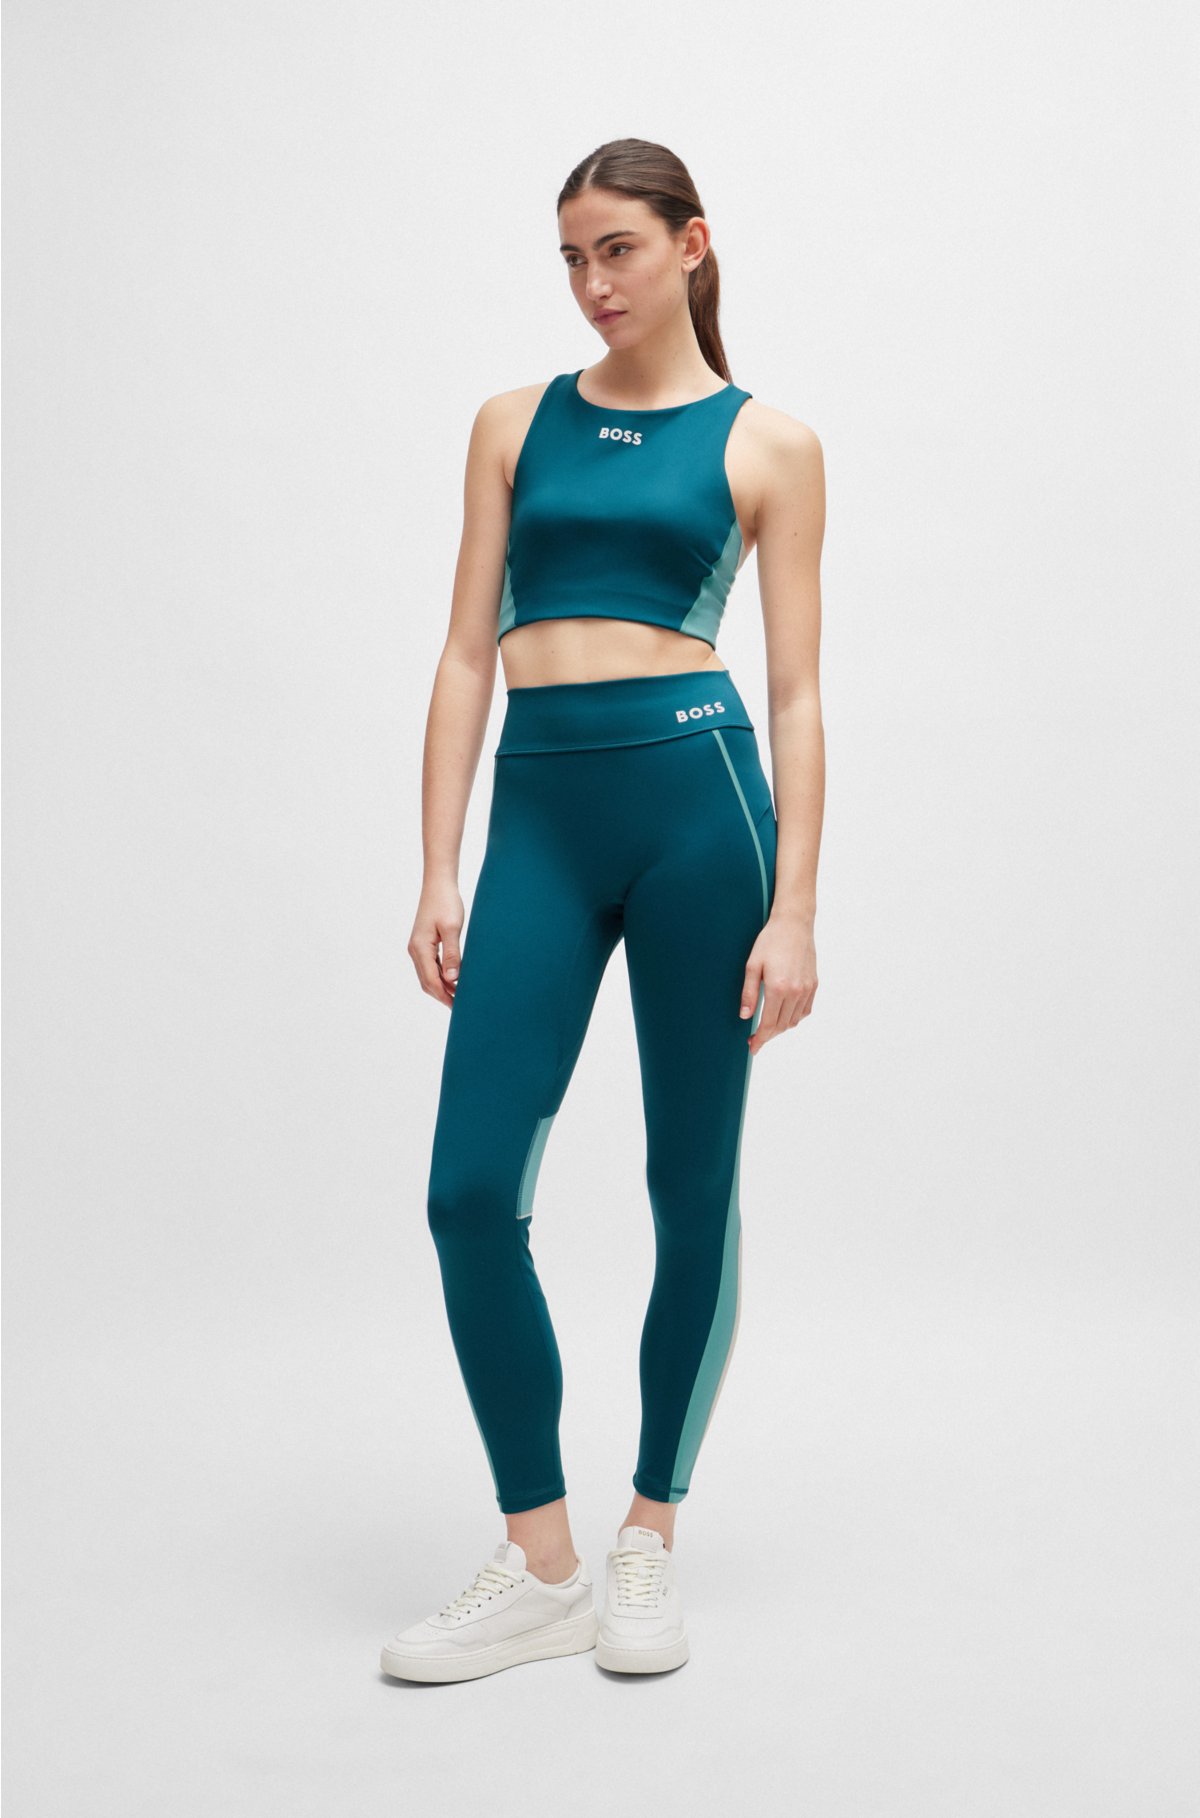 Slim-fit leggings with side stripes and logo detail, Petrol